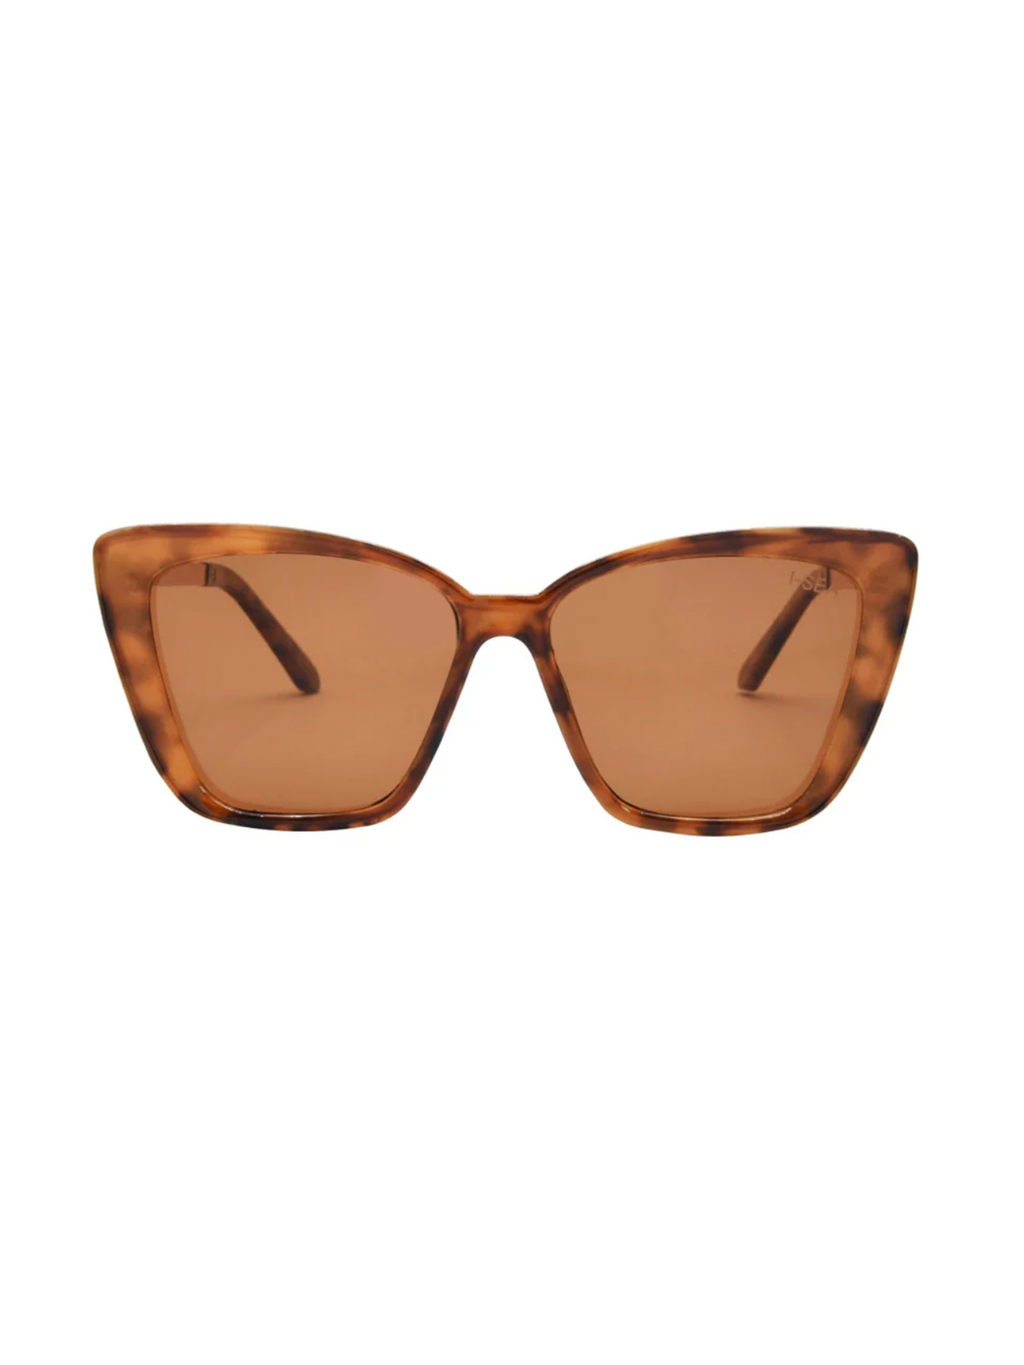 Aloha Fox Sunnies in Tort/Brown - Stitch And Feather